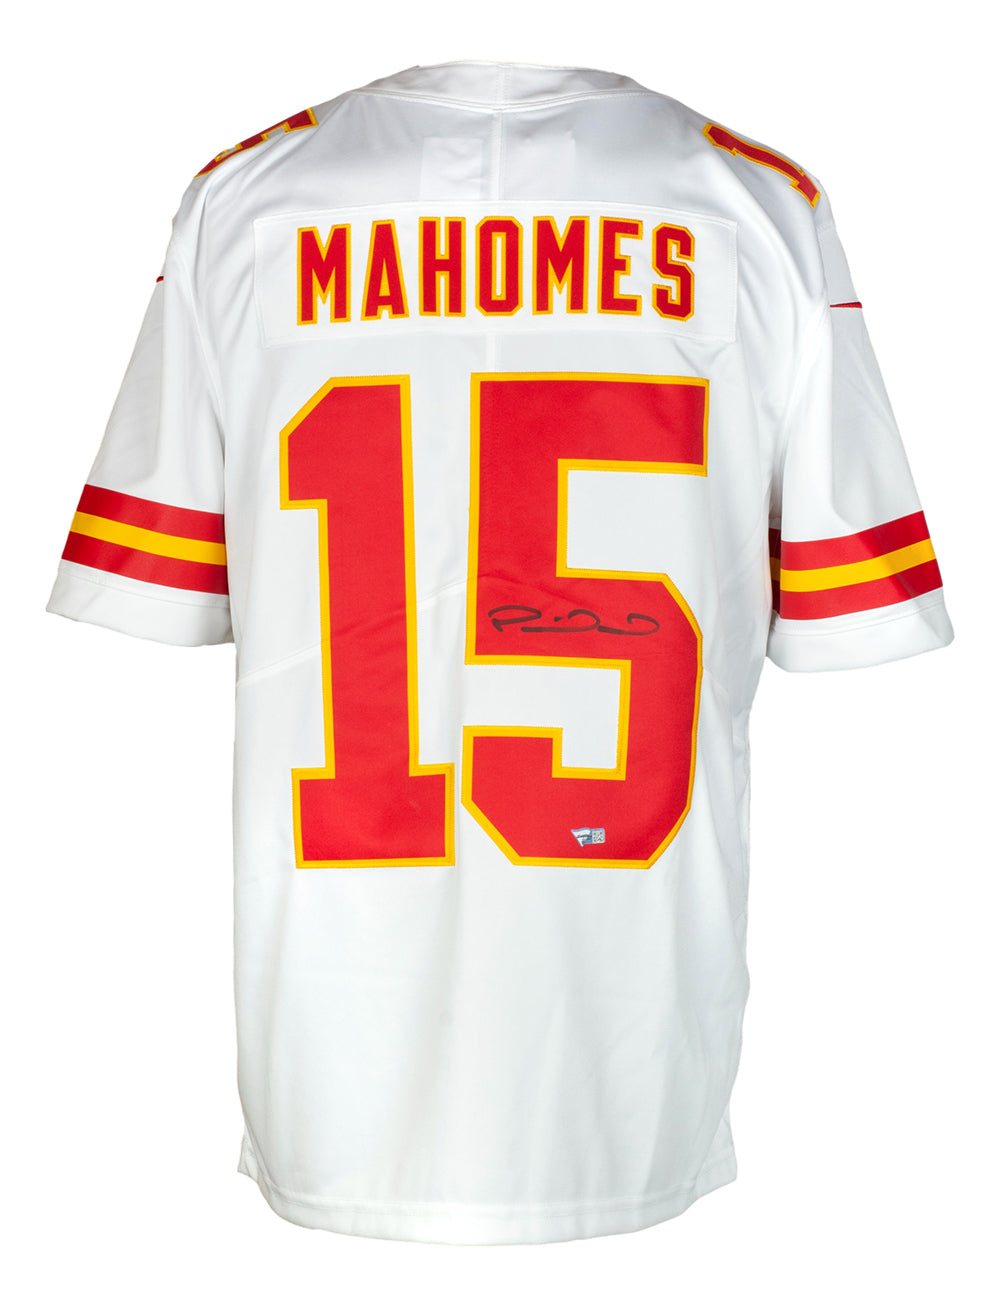 Patrick Mahomes Signed Chiefs Nike Limited Football Jersey